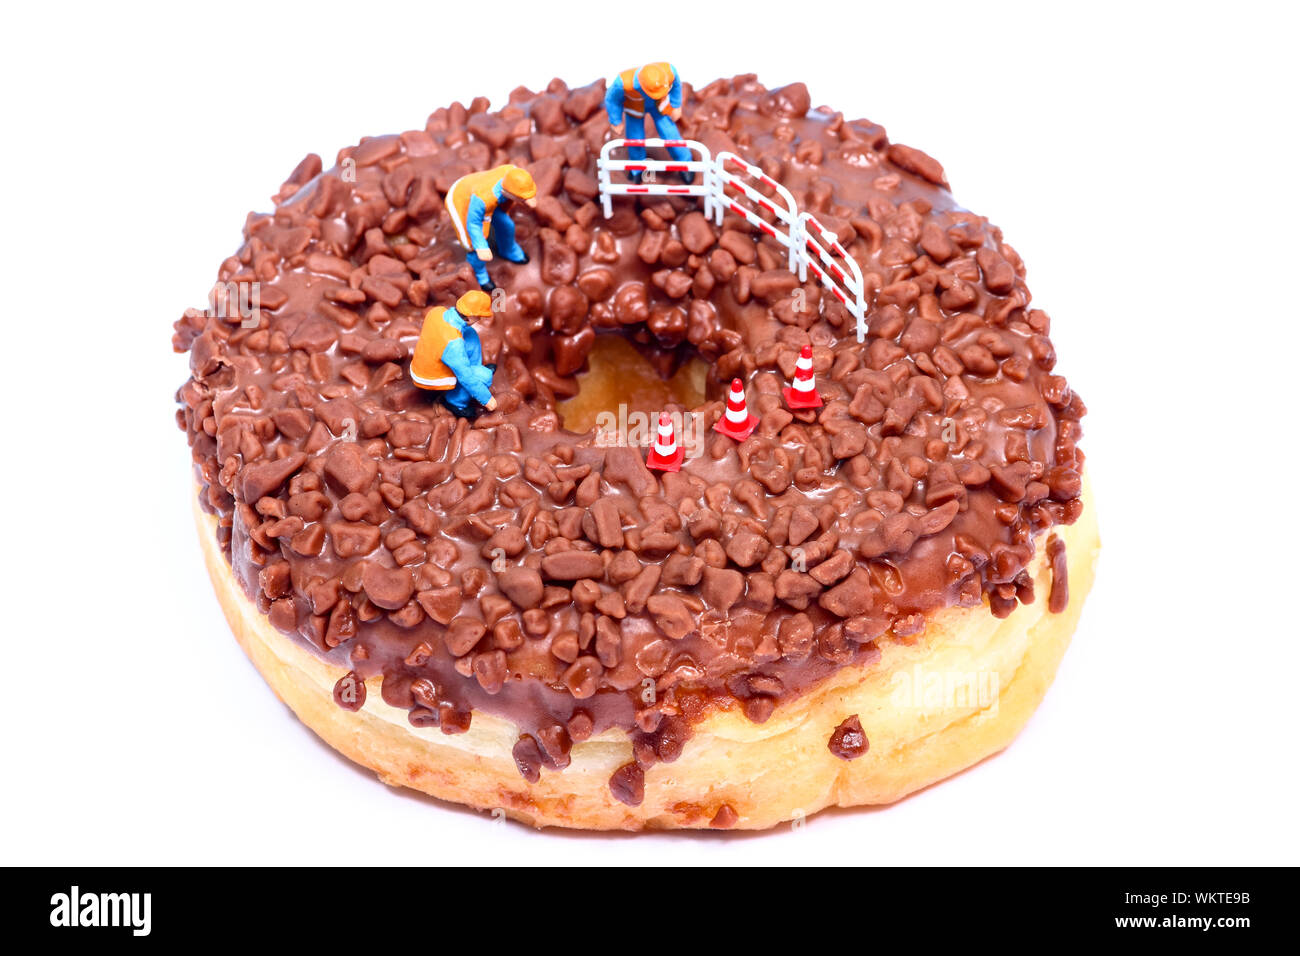 Conceptual image of a miniature figure workmen stood on a chocolate doughnut looking down the centre hole Stock Photo